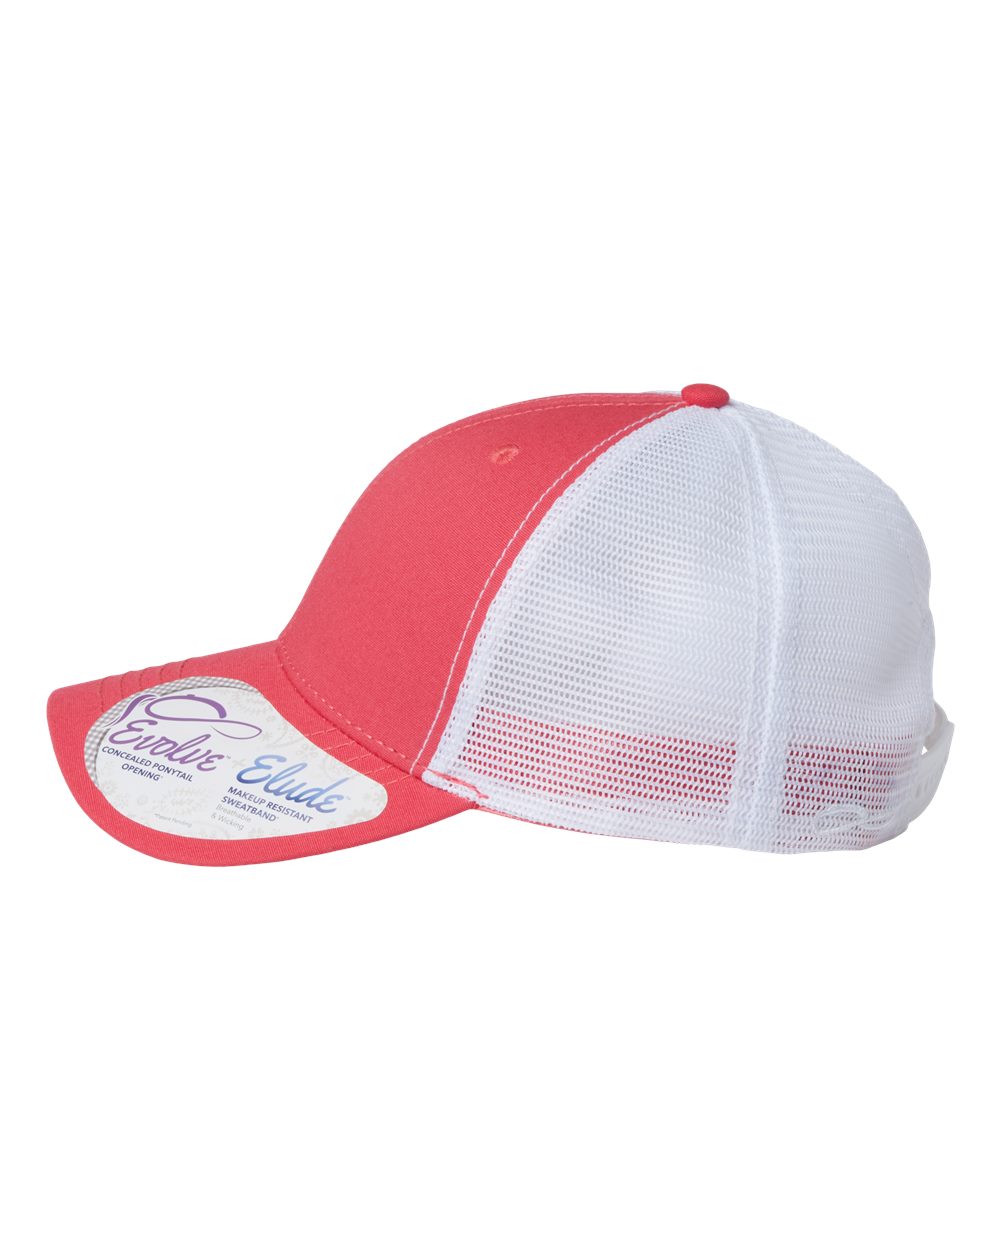 A women's modern trucker cap in coral with white mesh back.